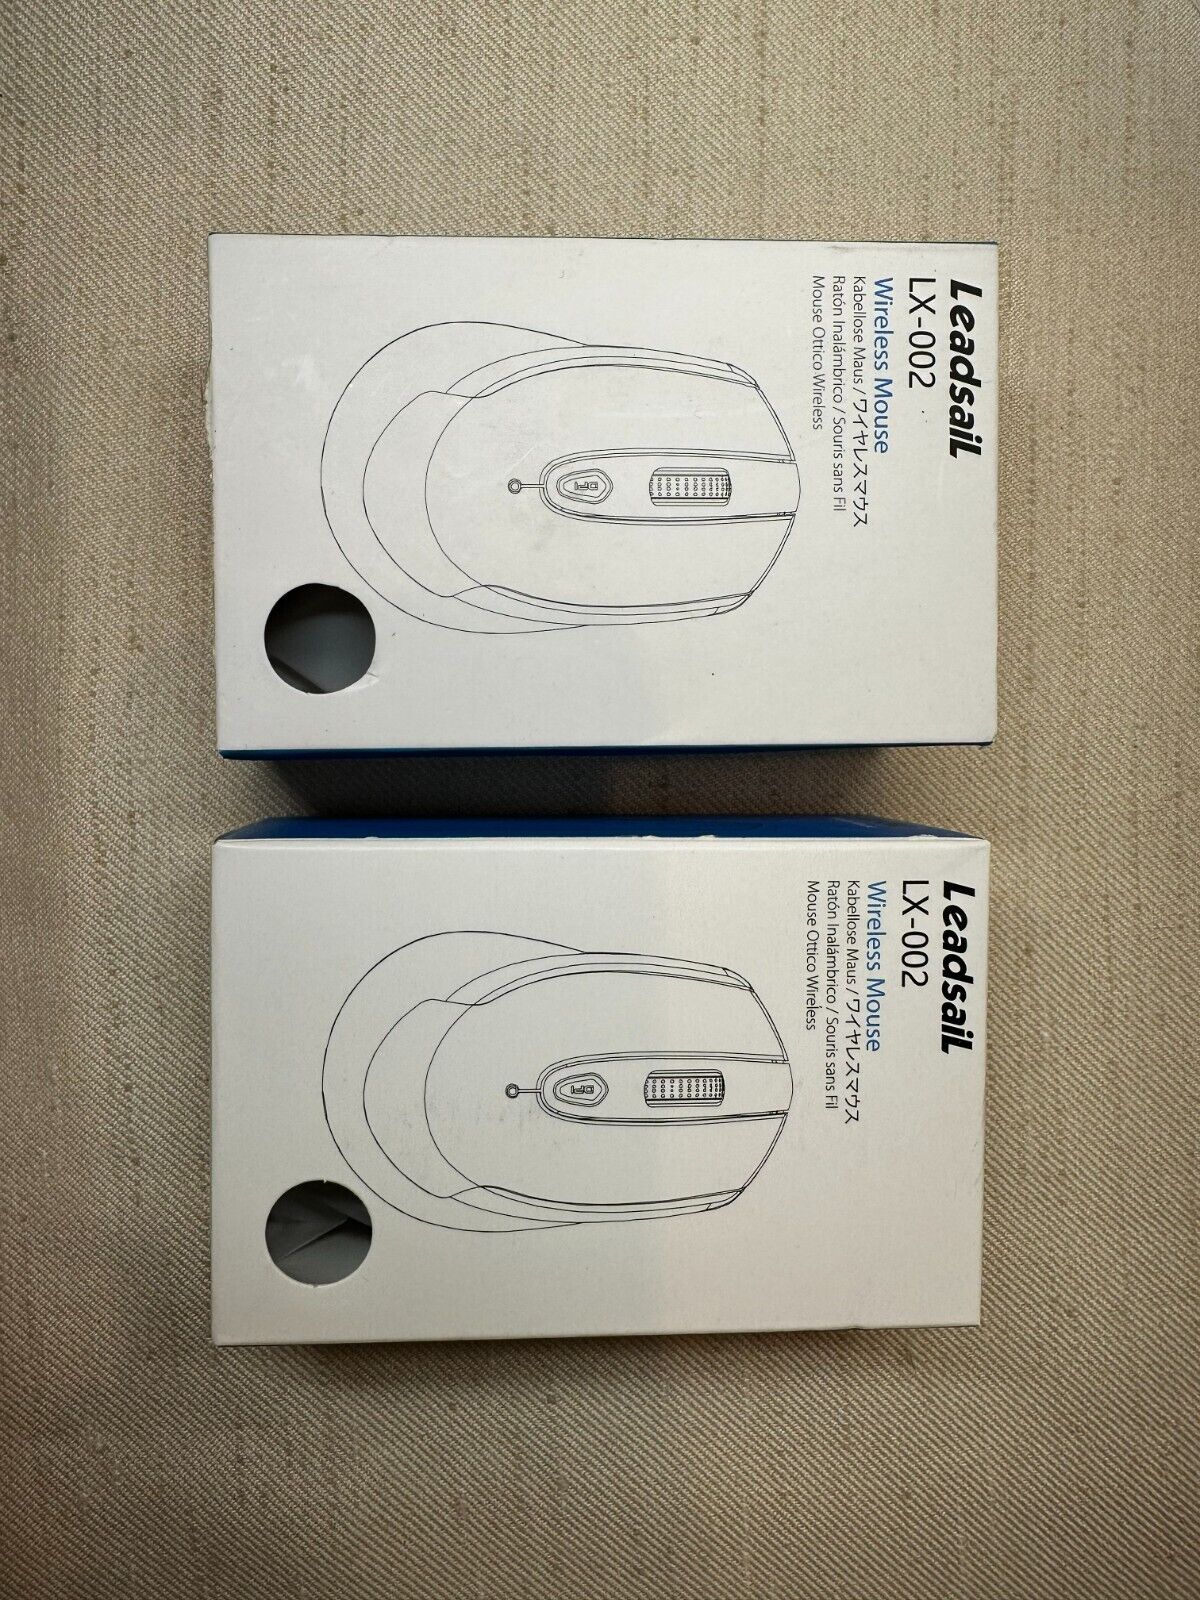 NEW (2 Pack LOT) LEADSAIL LX-002 Wireless OPTICAL Computer MOUSE